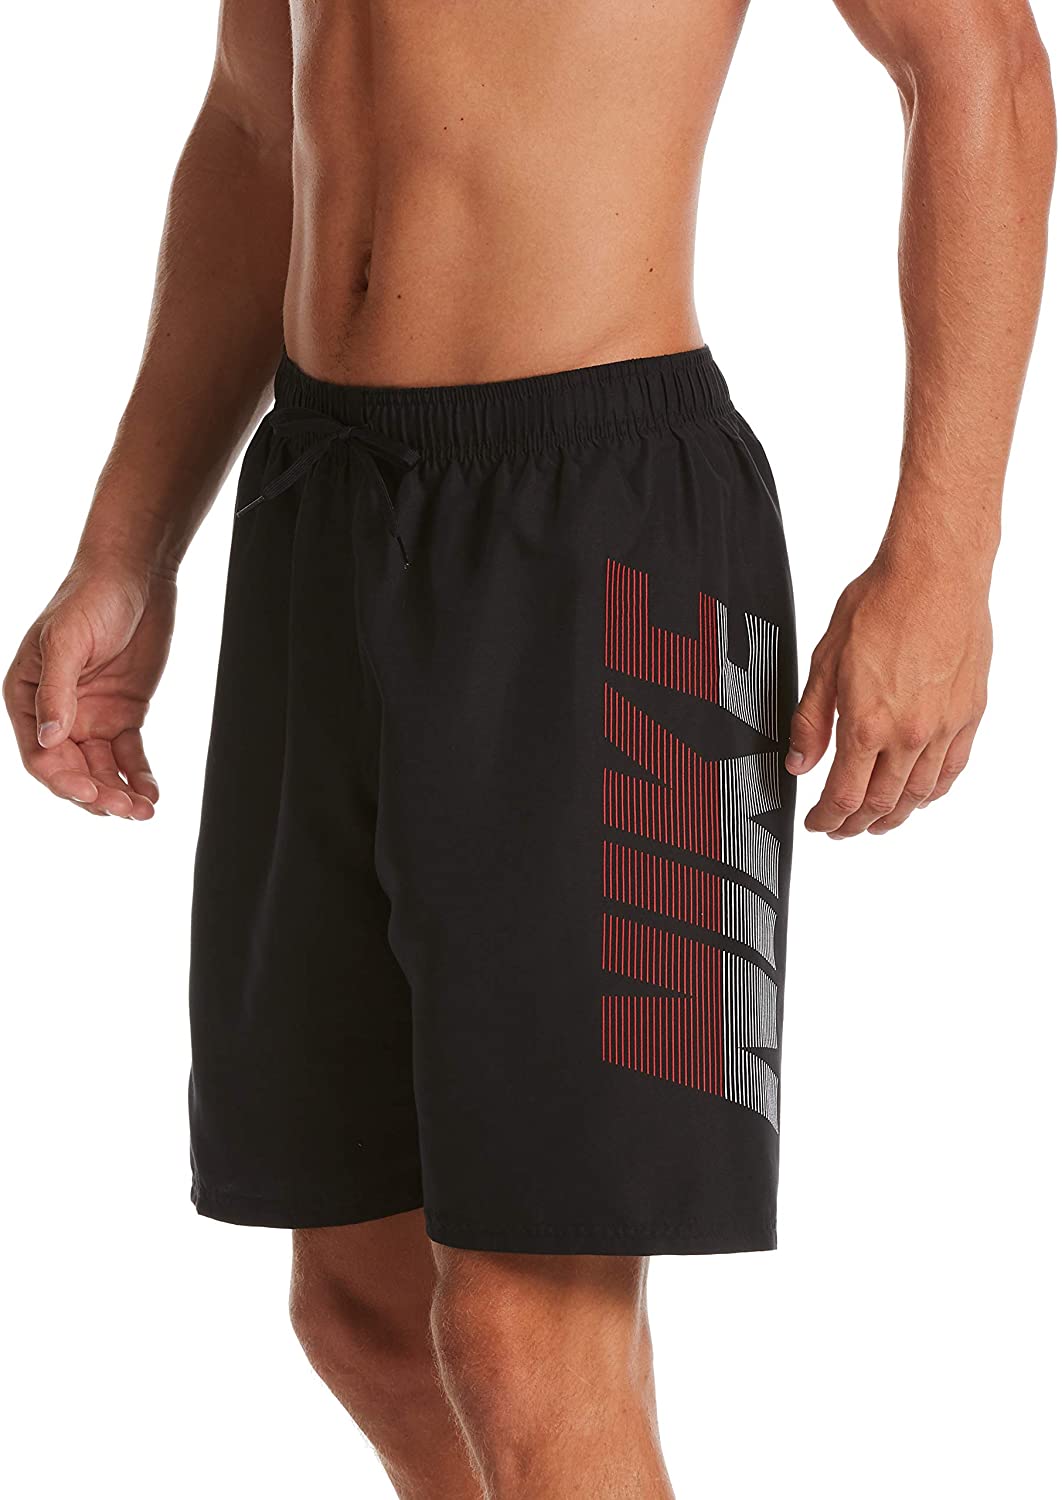 Men's Nike Logo Volley Short Swim Trunk in Black color from the front